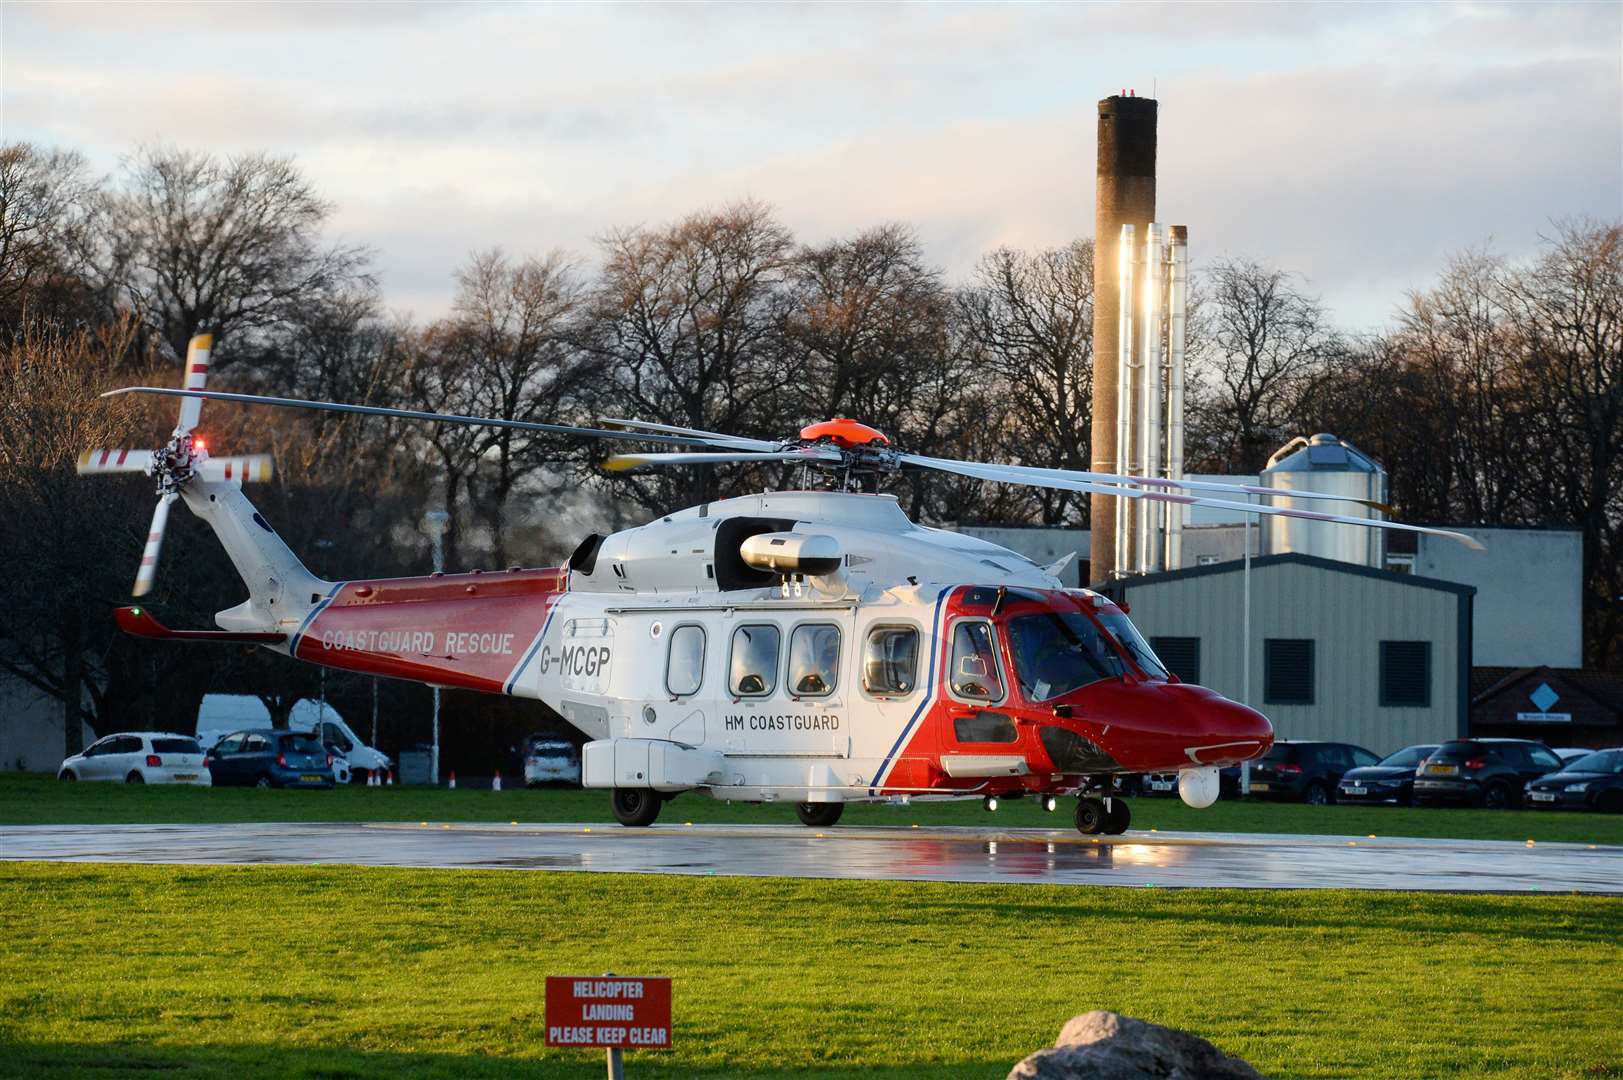 Helipad operations at Raigmore Hospital will not be compromised by the proposed route.